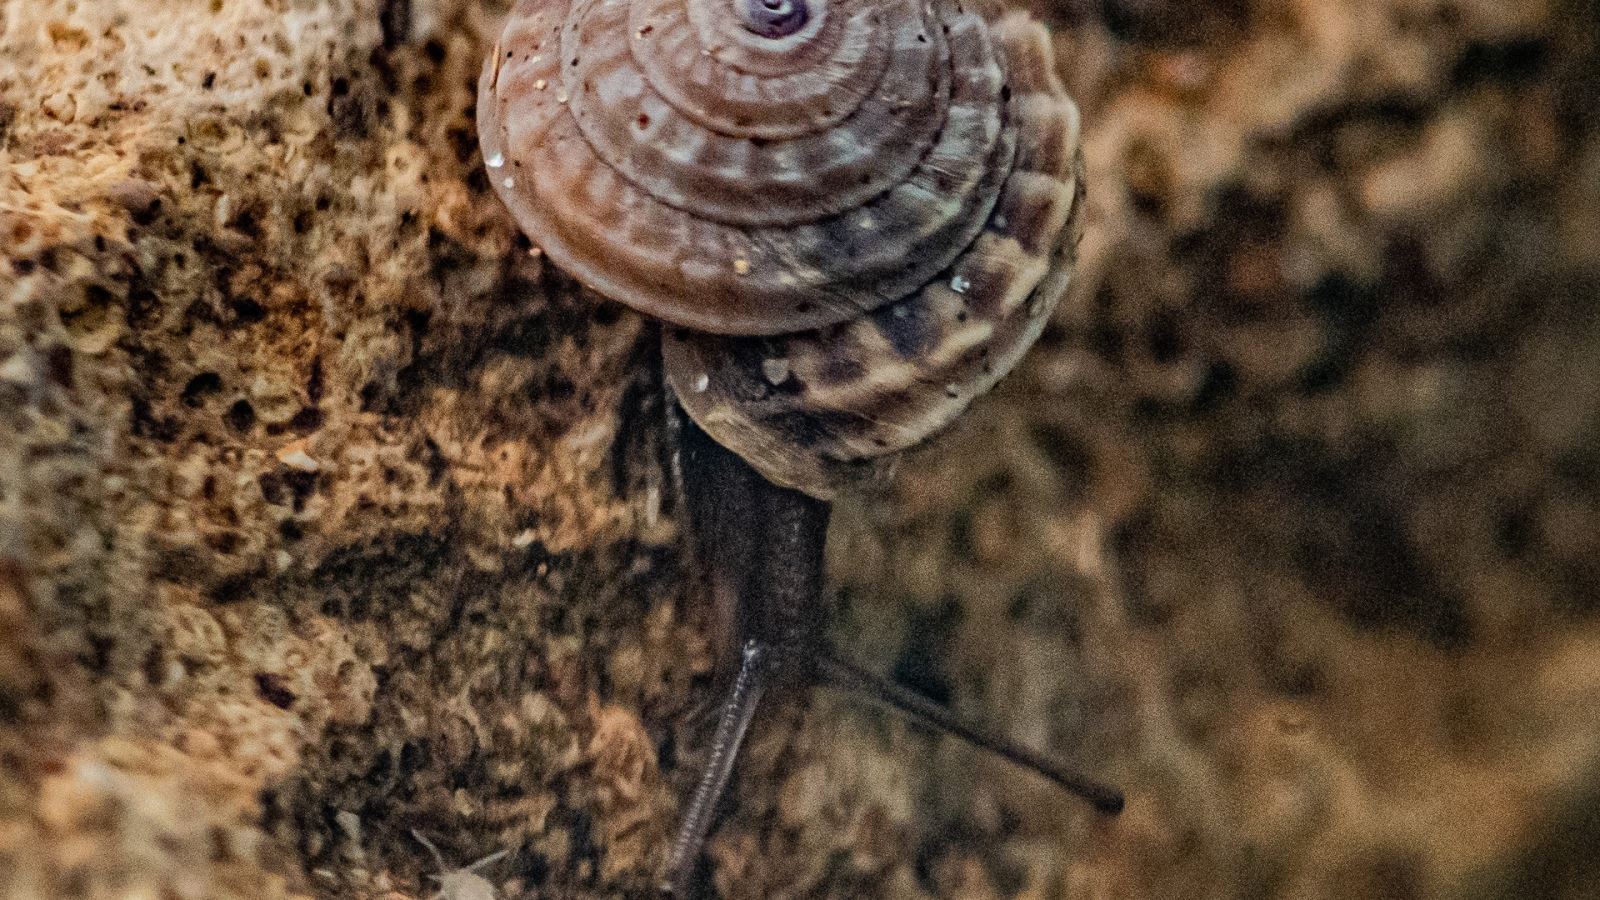 Two species of land snails, thought to be extinct for more than 100 years, have been bred by experts at Bristol Zoological Society and Chester Zoo 